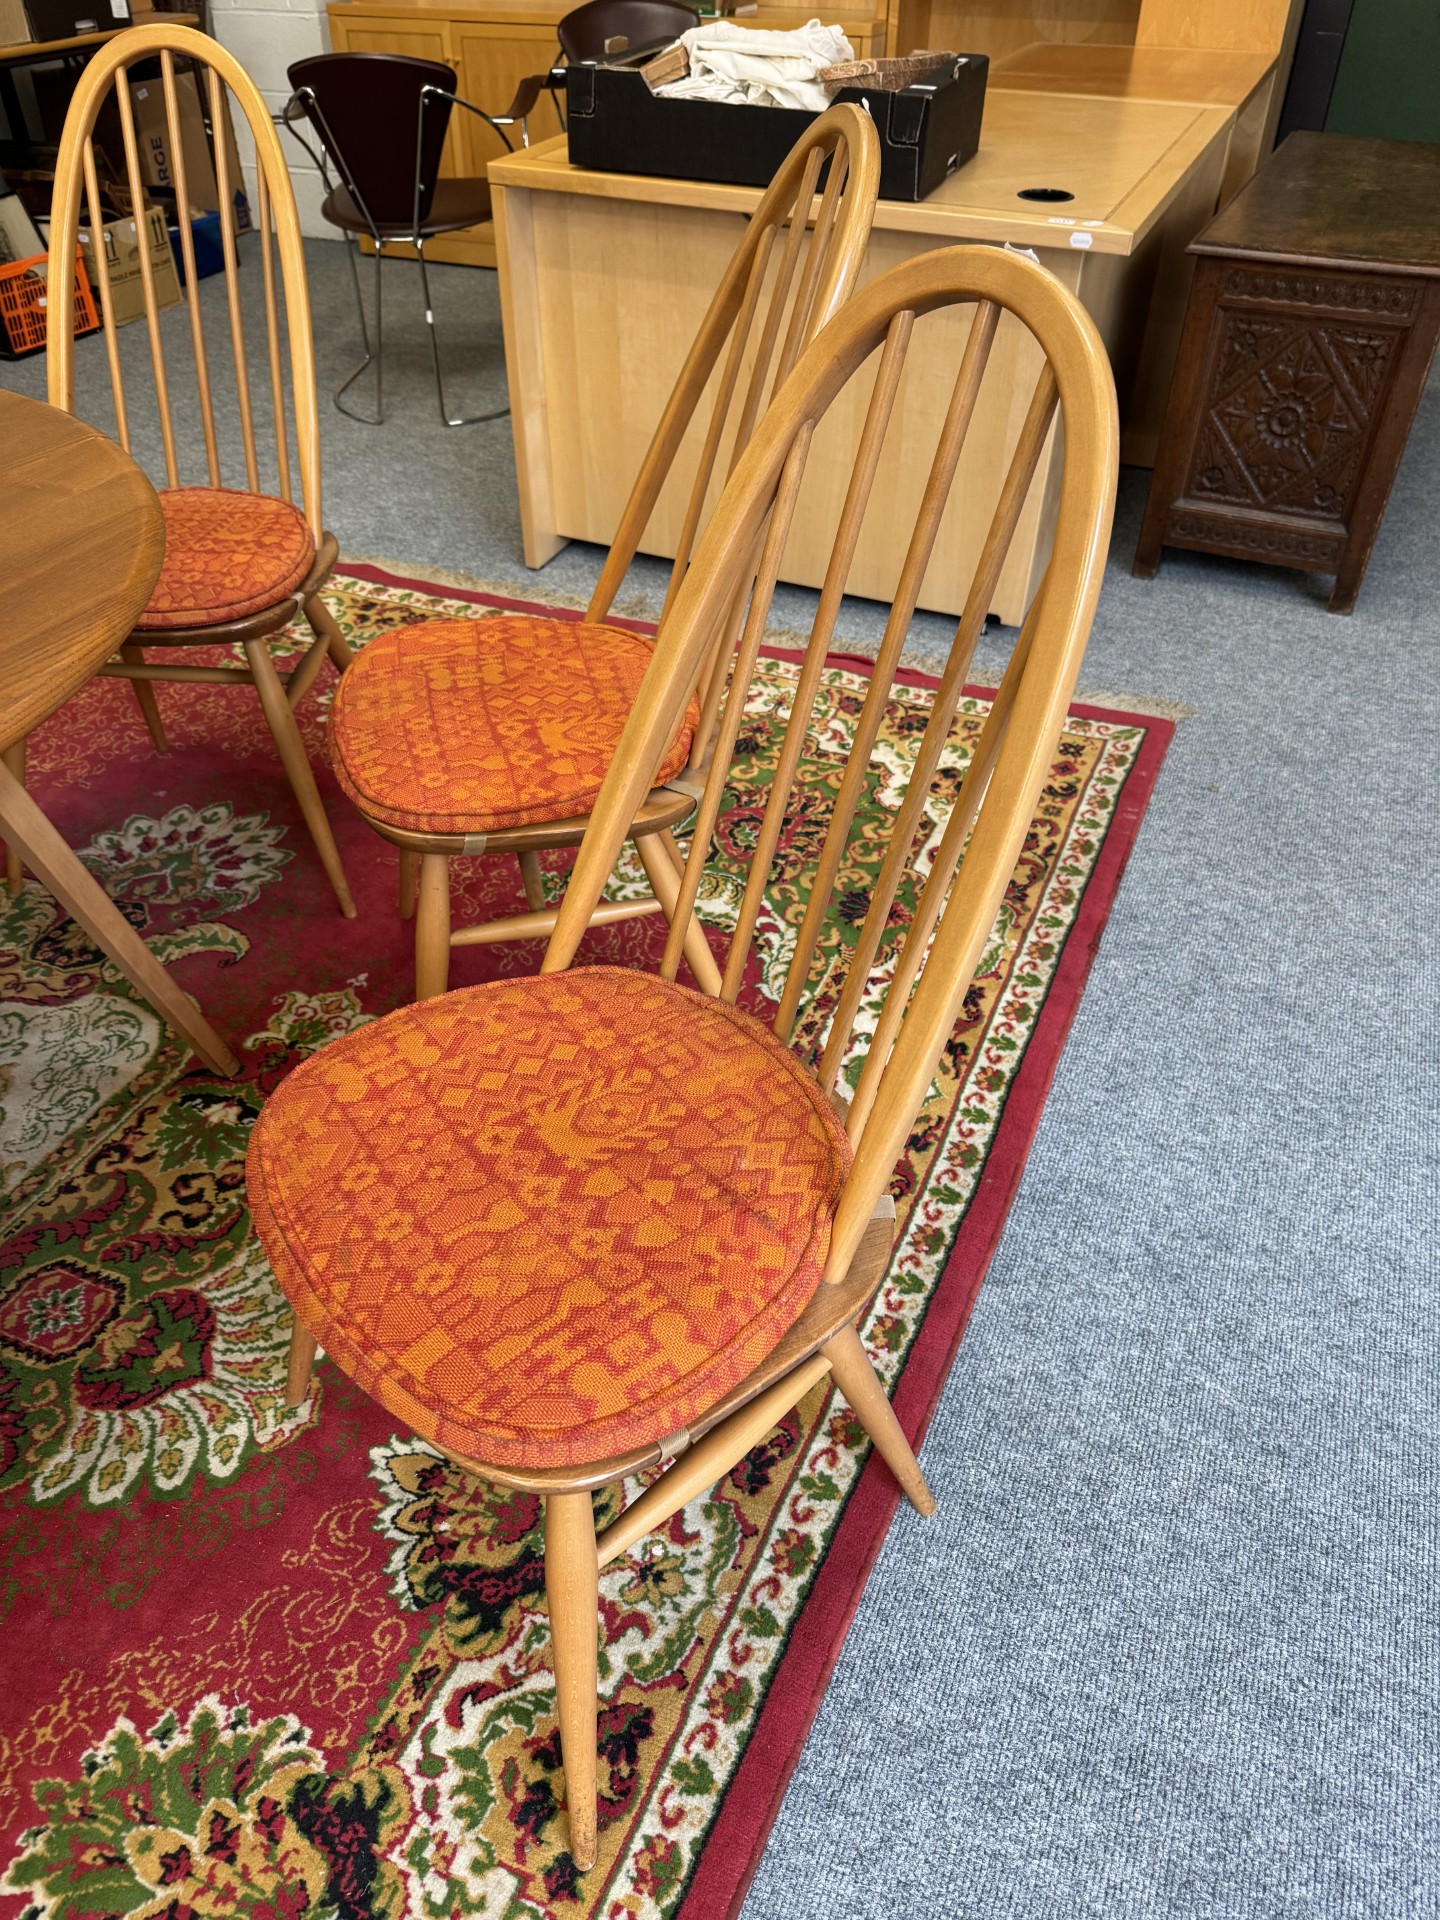 Ercol table and four chairs (4 Chairs)の画像